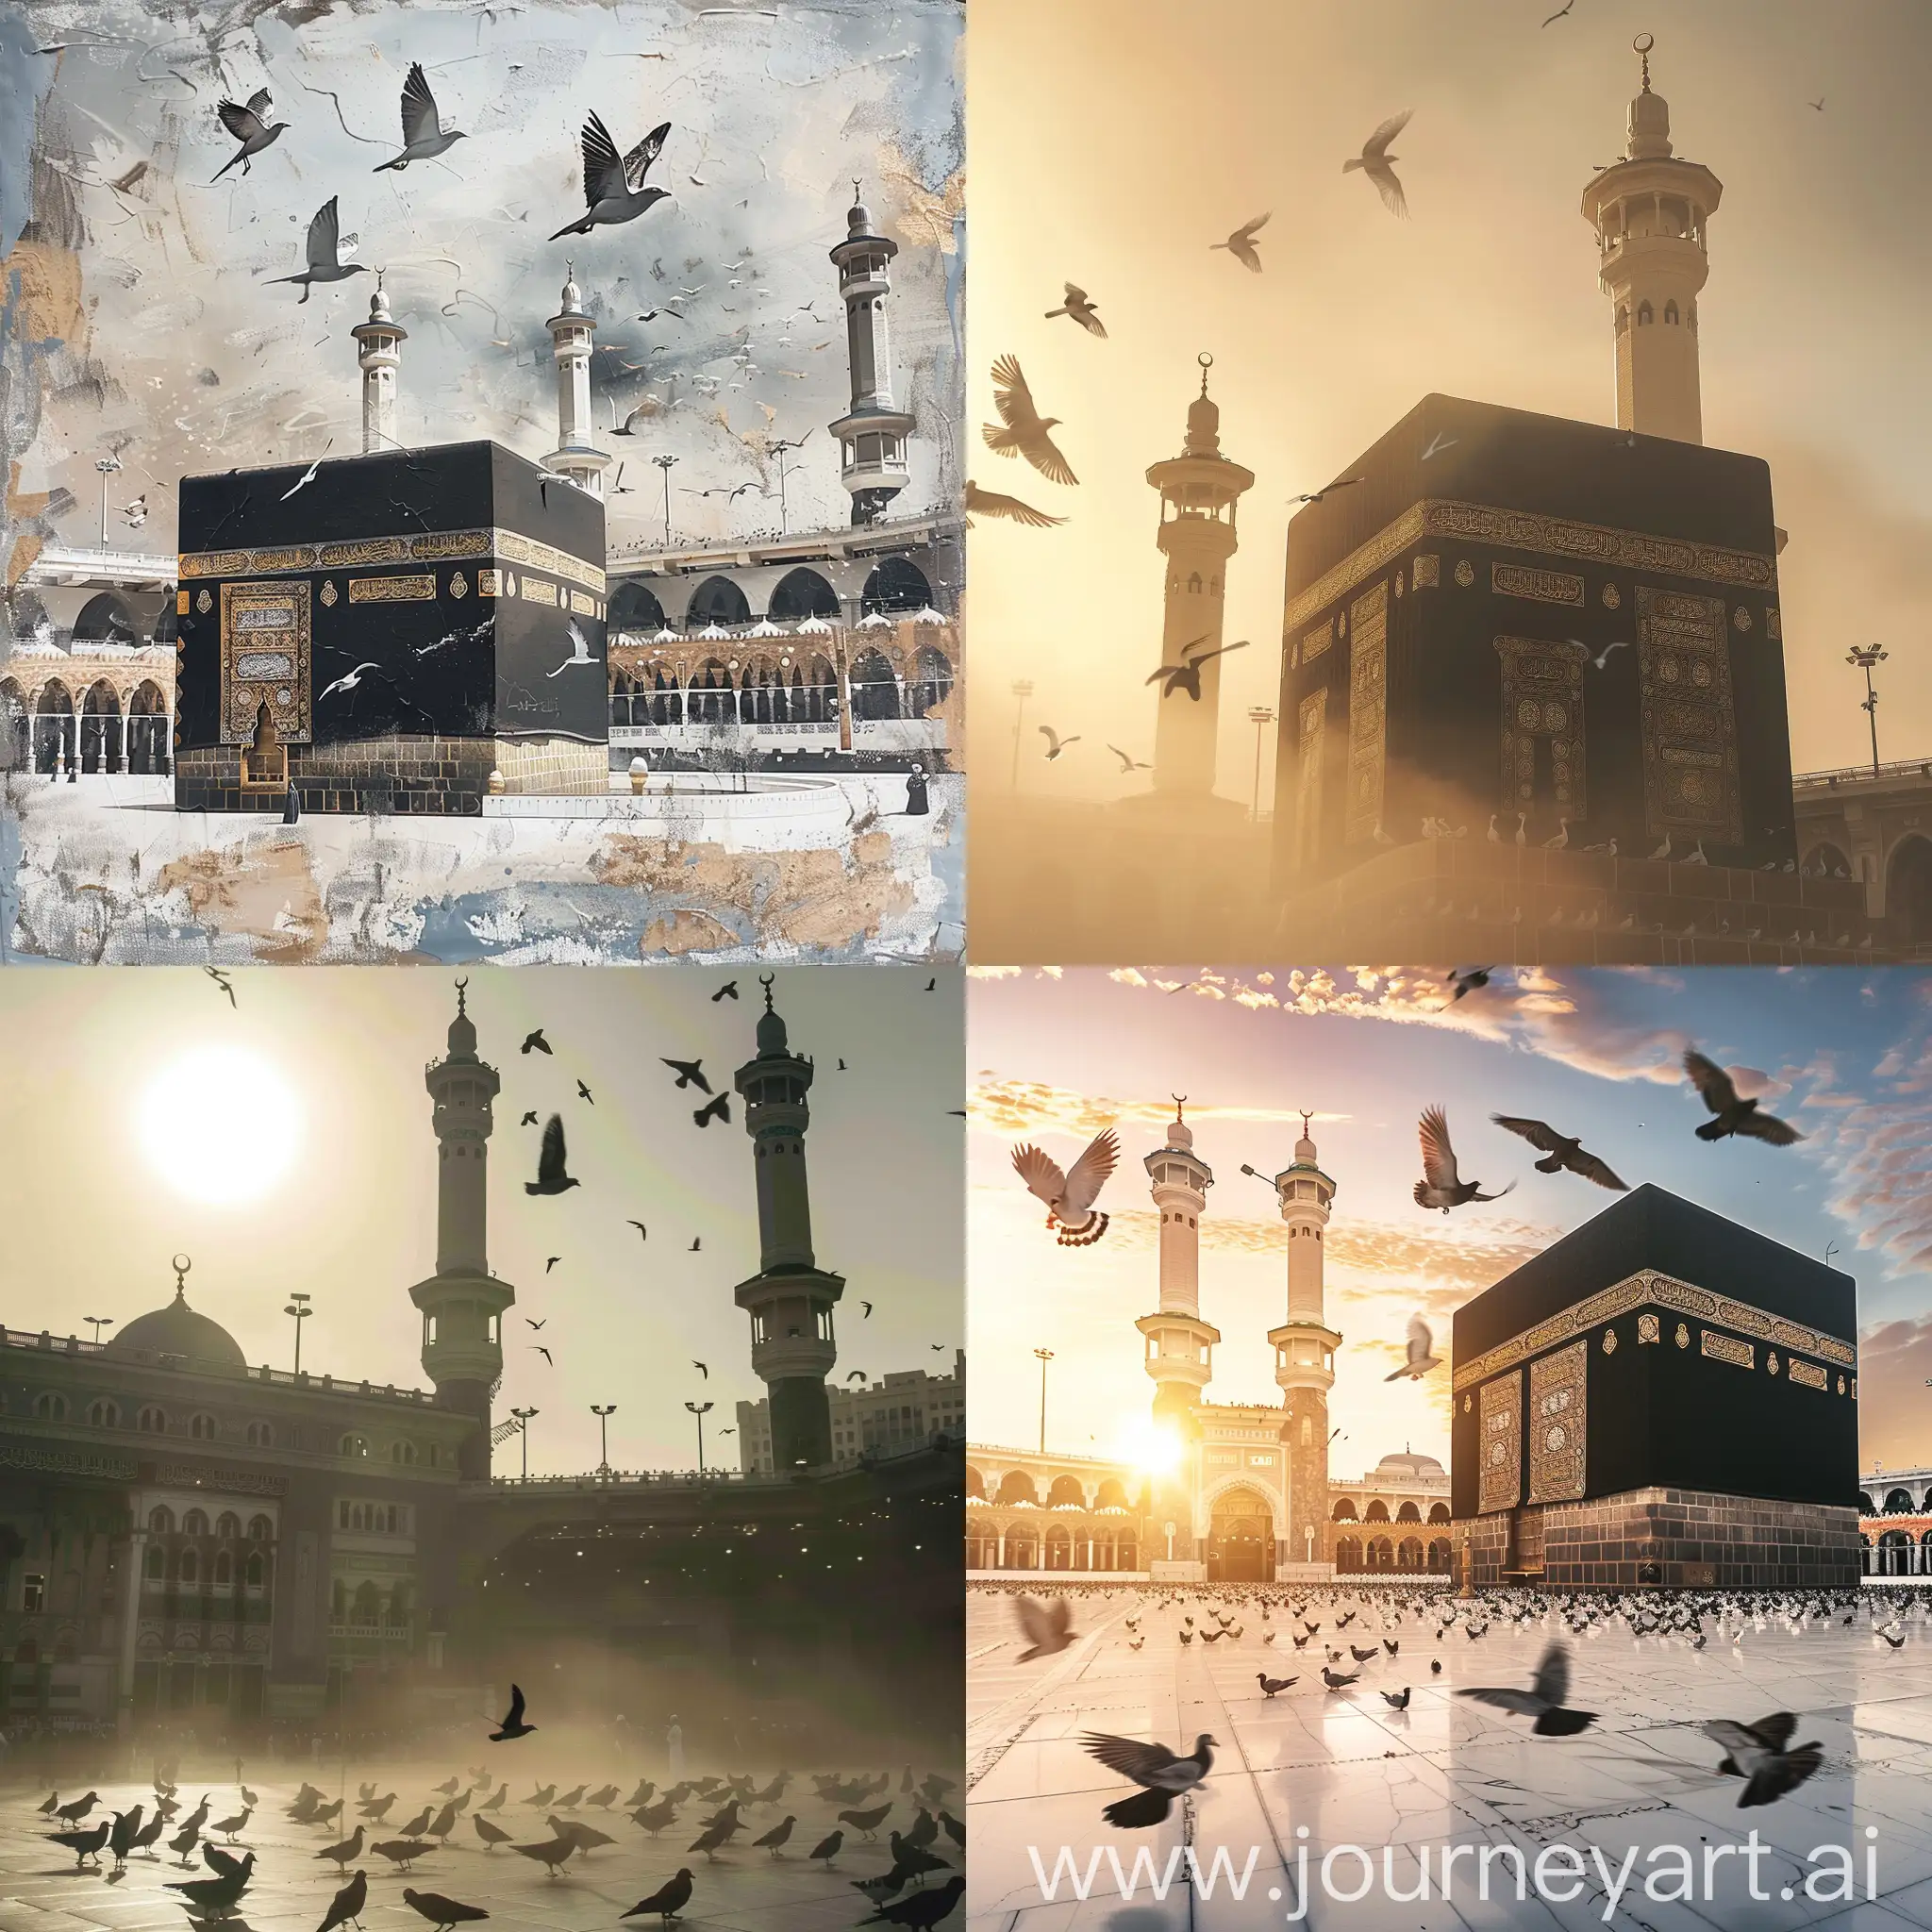 Kaaba-surrounded-by-Flying-Birds